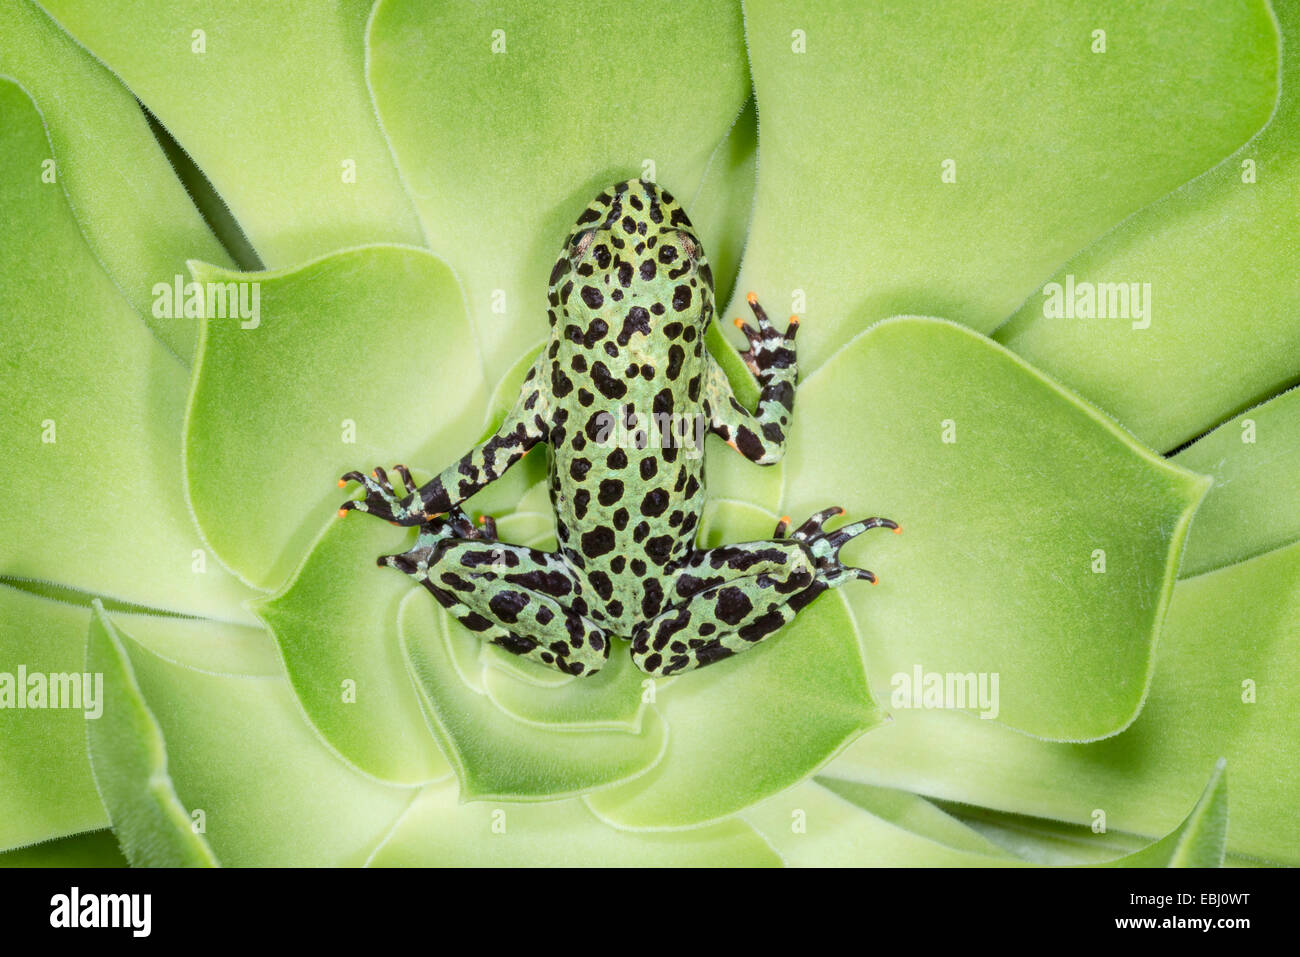 Fire-bellied Toad lying on top of a succulent plant Stock Photo